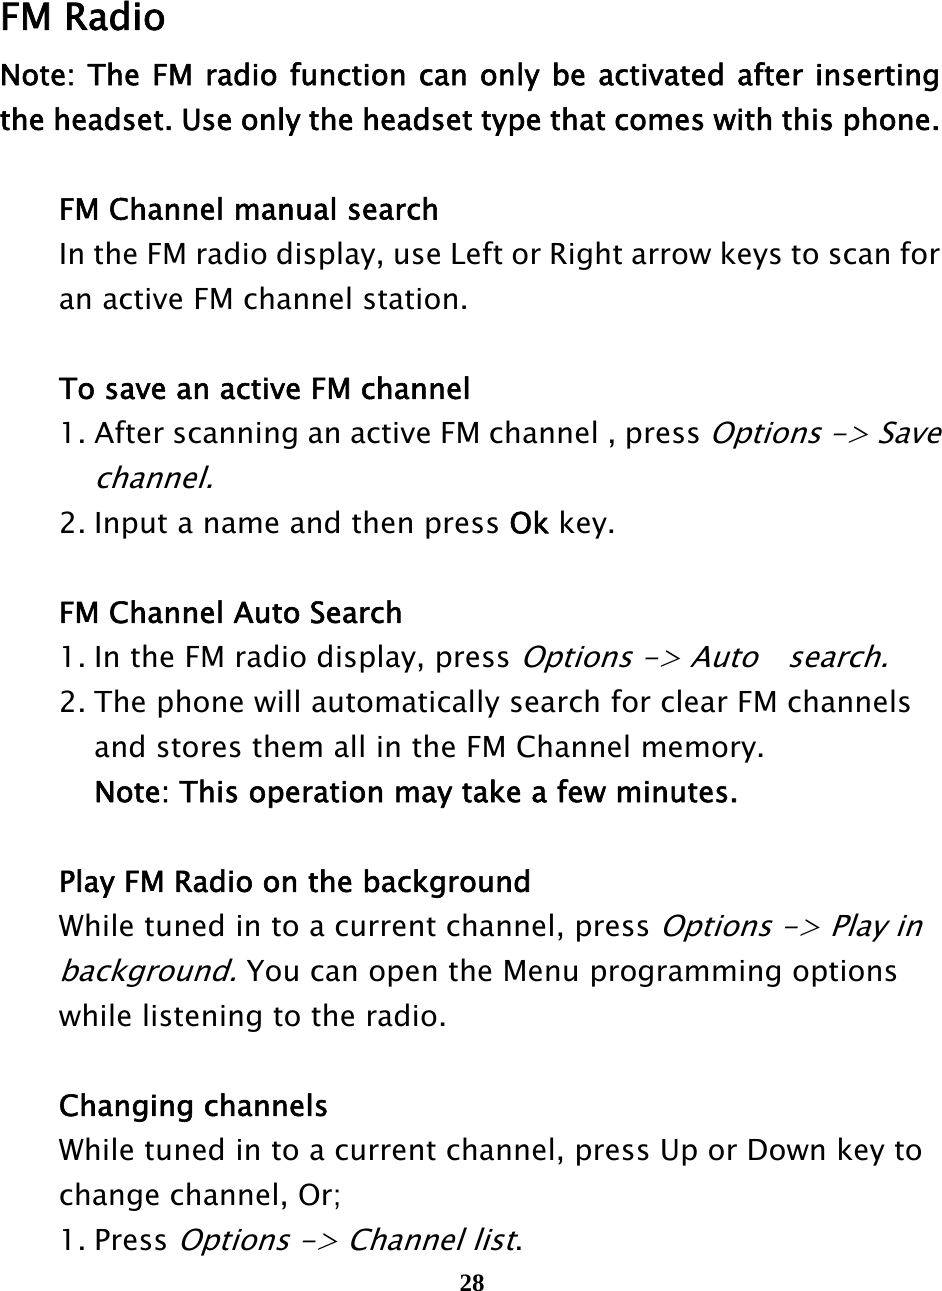  28       FM Radio Note: The FM radio function can only be activated after inserting the headset. Use only the headset type that comes with this phone.    FM Channel manual search   In the FM radio display, use Left or Right arrow keys to scan for     an active FM channel station.     To save an active FM channel   1. After scanning an active FM channel , press Options -&gt; Save     channel.    2. Input a name and then press Ok key.    FM Channel Auto Search   1. In the FM radio display, press Options -&gt; Auto    search.    2. The phone will automatically search for clear FM channels     and stores them all in the FM Channel memory.       Note: This operation may take a few minutes.    Play FM Radio on the background  While tuned in to a current channel, press Options -&gt; Play in    background. You can open the Menu programming options     while listening to the radio.         Changing channels  While tuned in to a current channel, press Up or Down key to    change channel, Or;  1. Press Options -&gt; Channel list. 